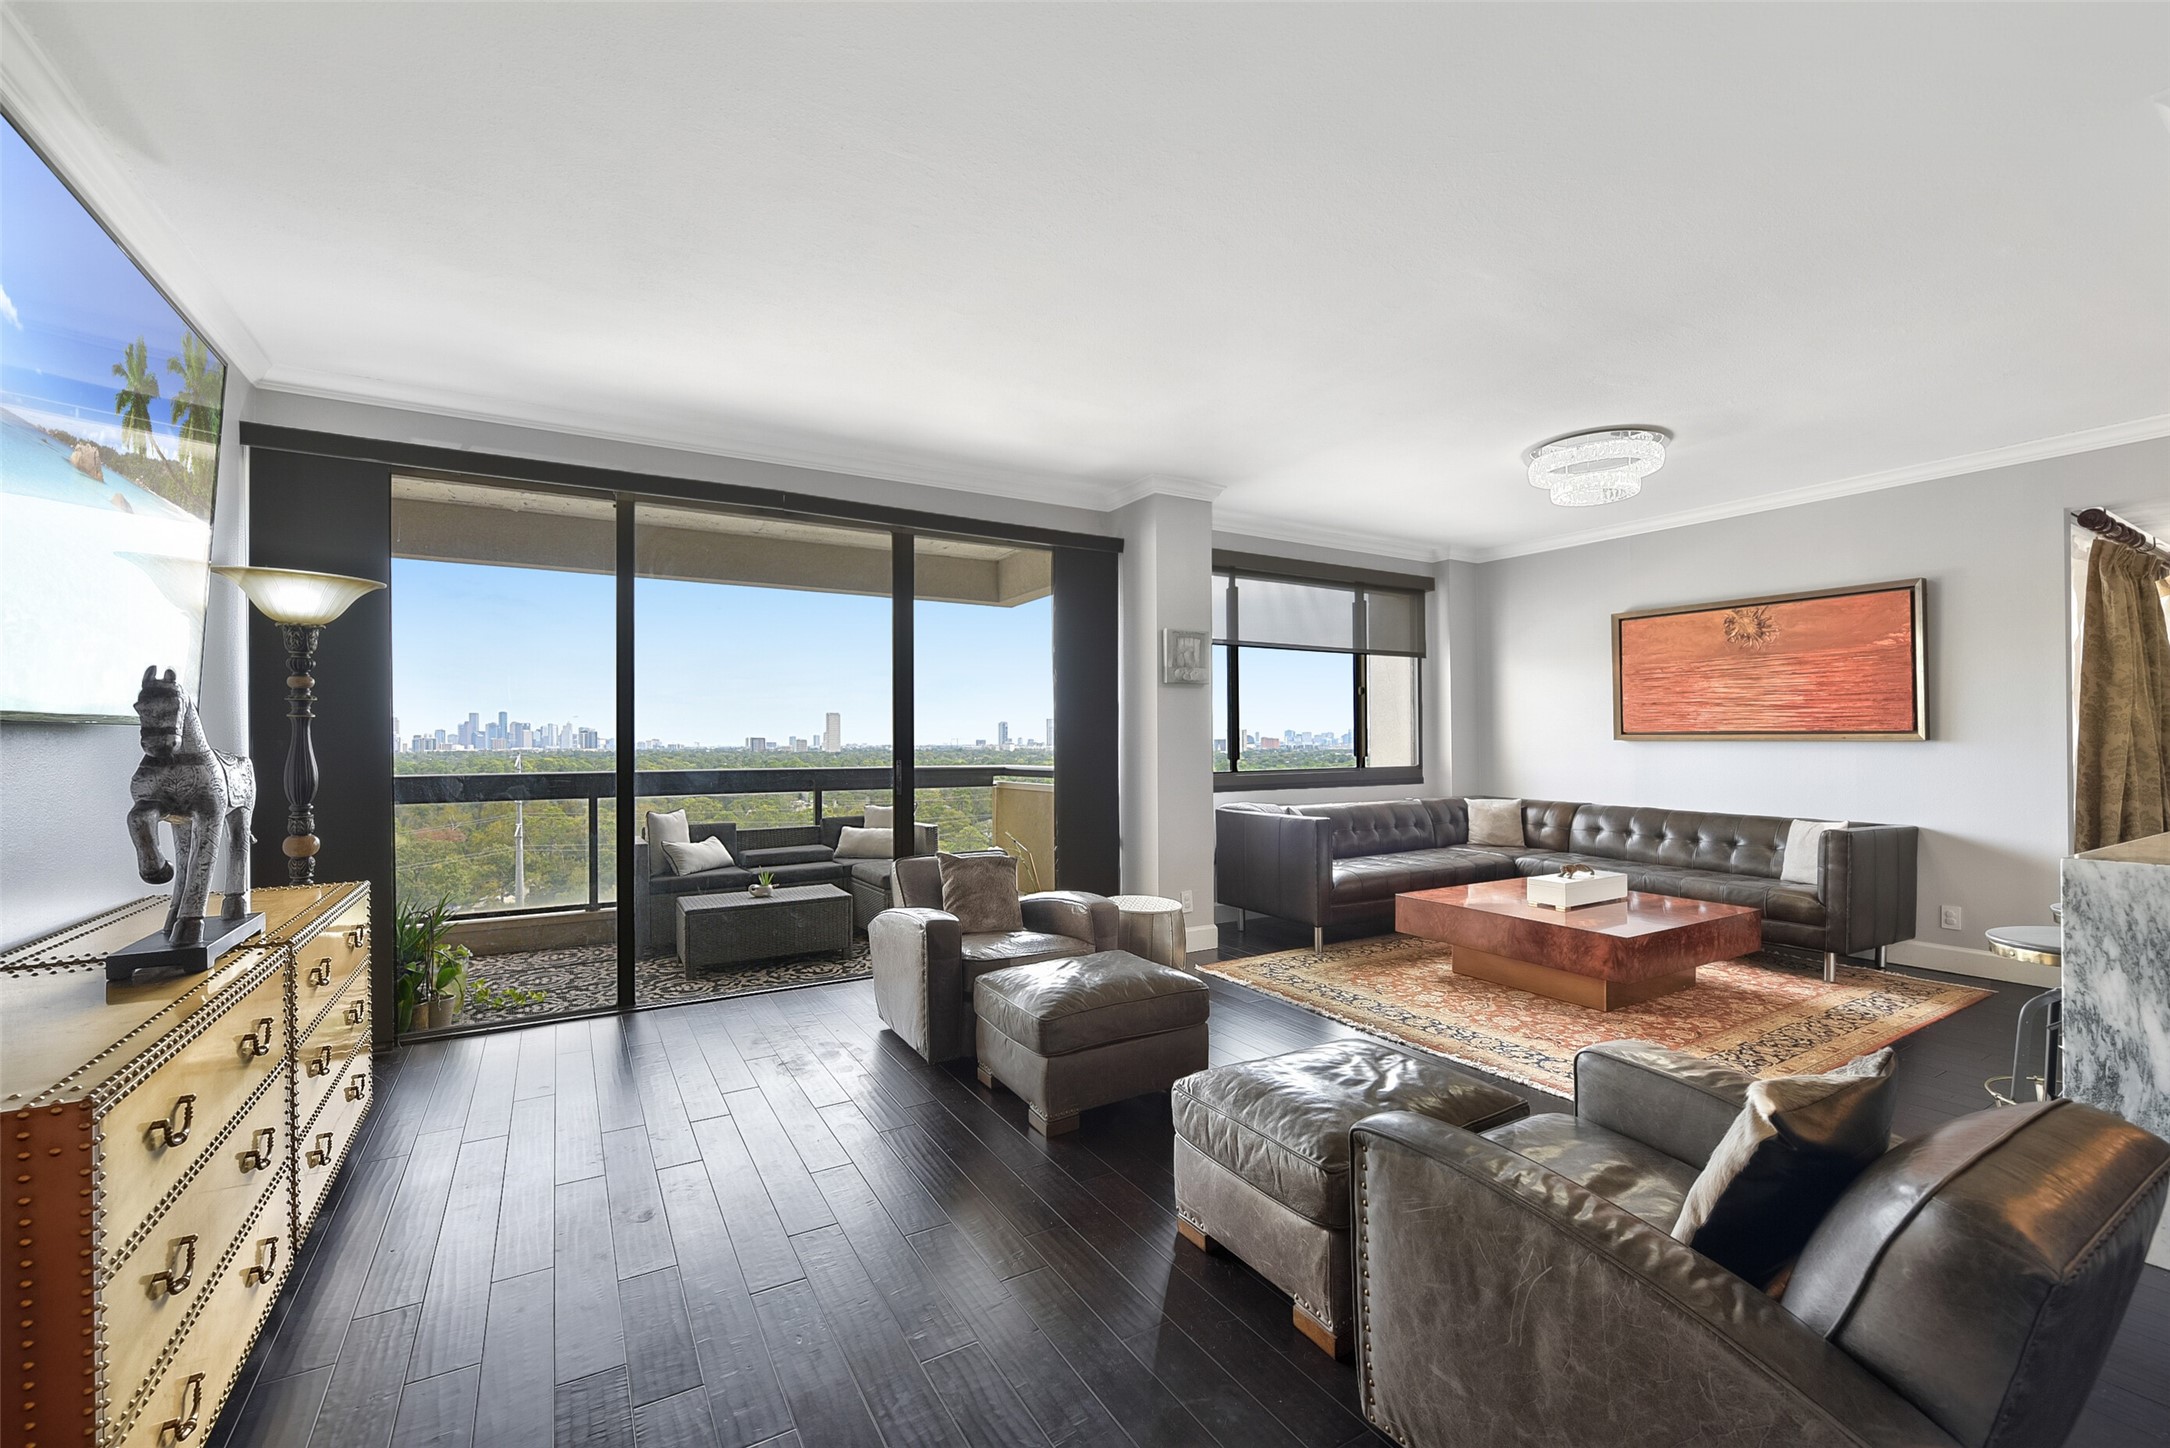 Welcome home to the elevated living experience of this updated 16th-floor 2-bedroom, 2-bath condo in Park Square. Revel in the modern comforts and breathtaking views that define this sophisticated urban retreat. Enjoy a lifestyle of convenience and luxury in the heart of the city.